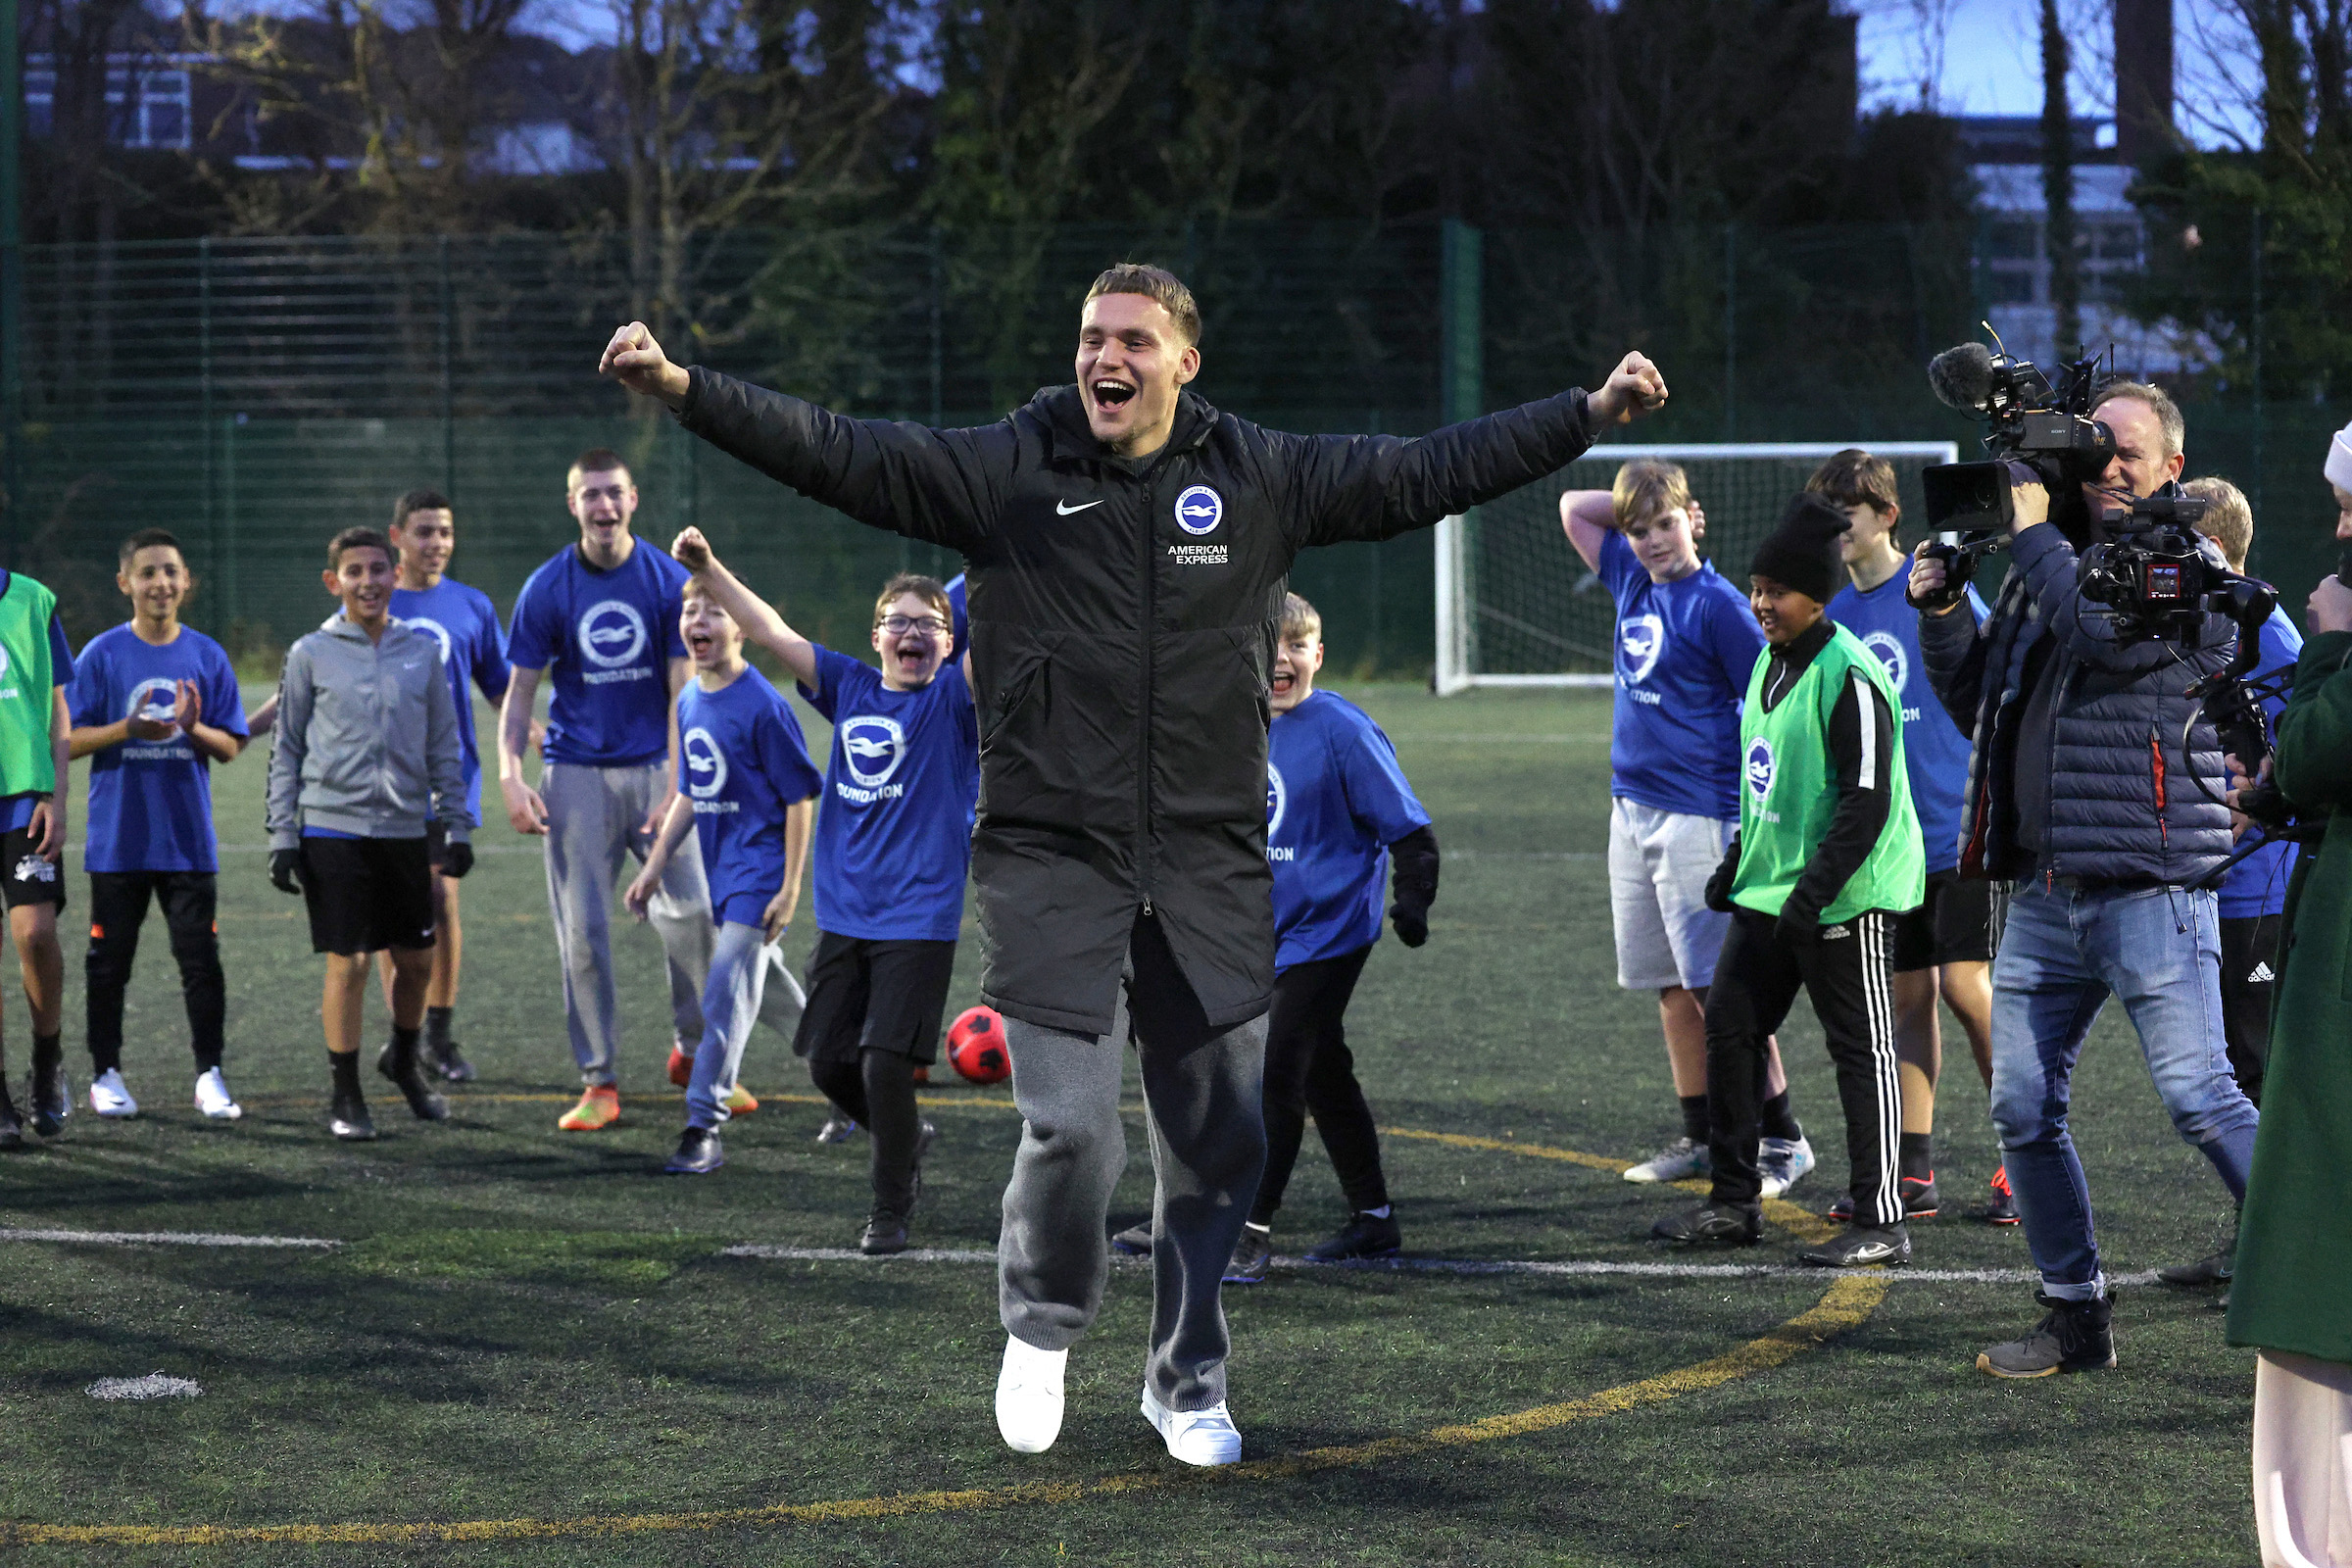 Bart Verbruggen celebrates in front of a crowd of children wearing BHAFC foundation tees.